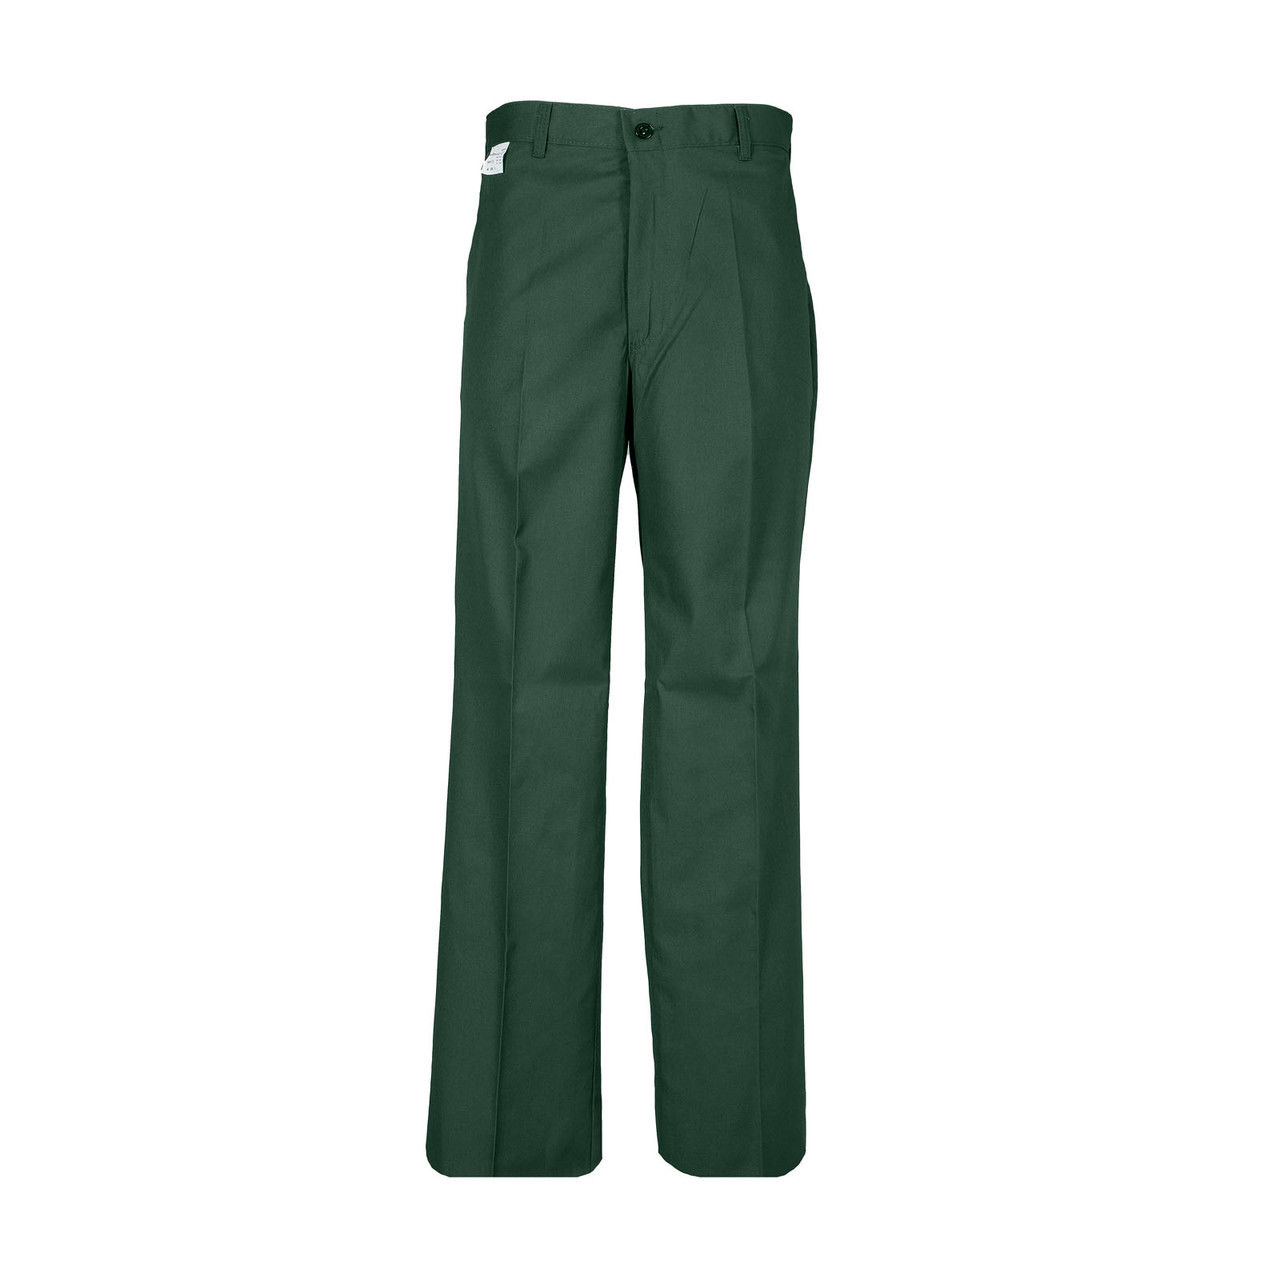 What are the key traits of these green work pants?